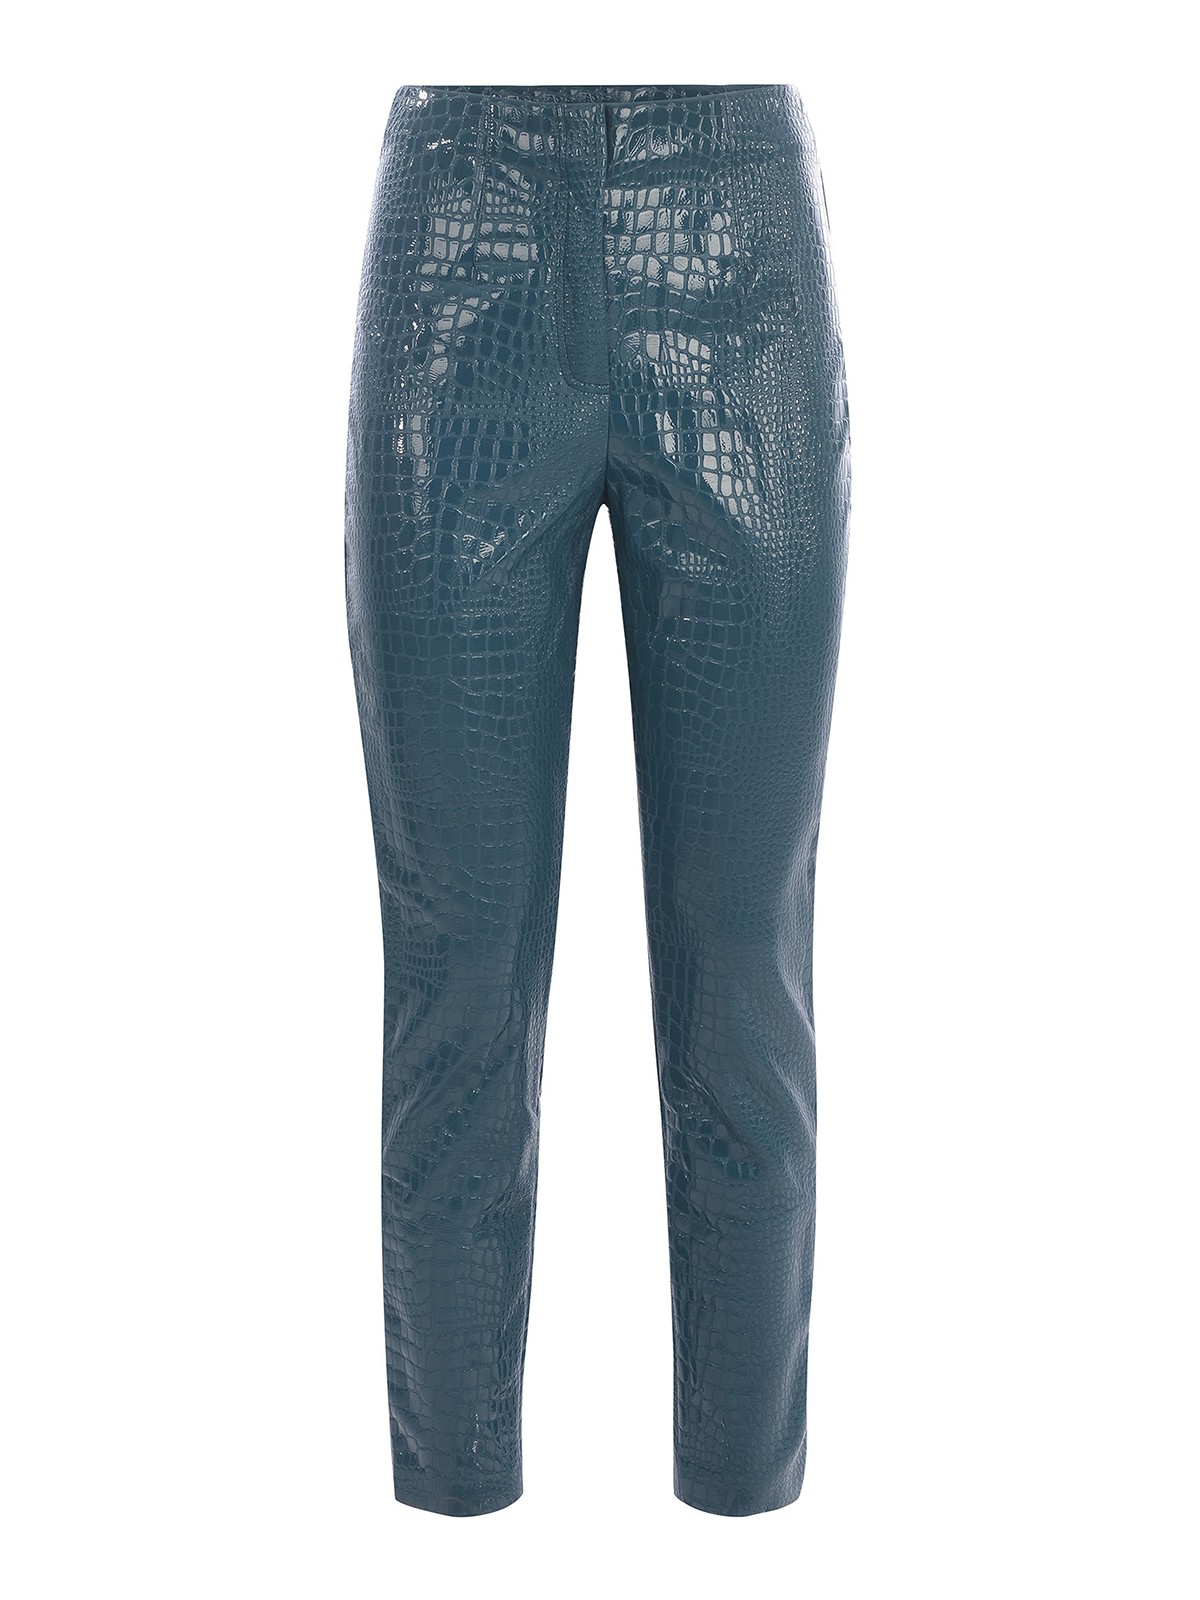 Shop Rotate Birger Christensen Trousers Rotate Faux Leather In Blue